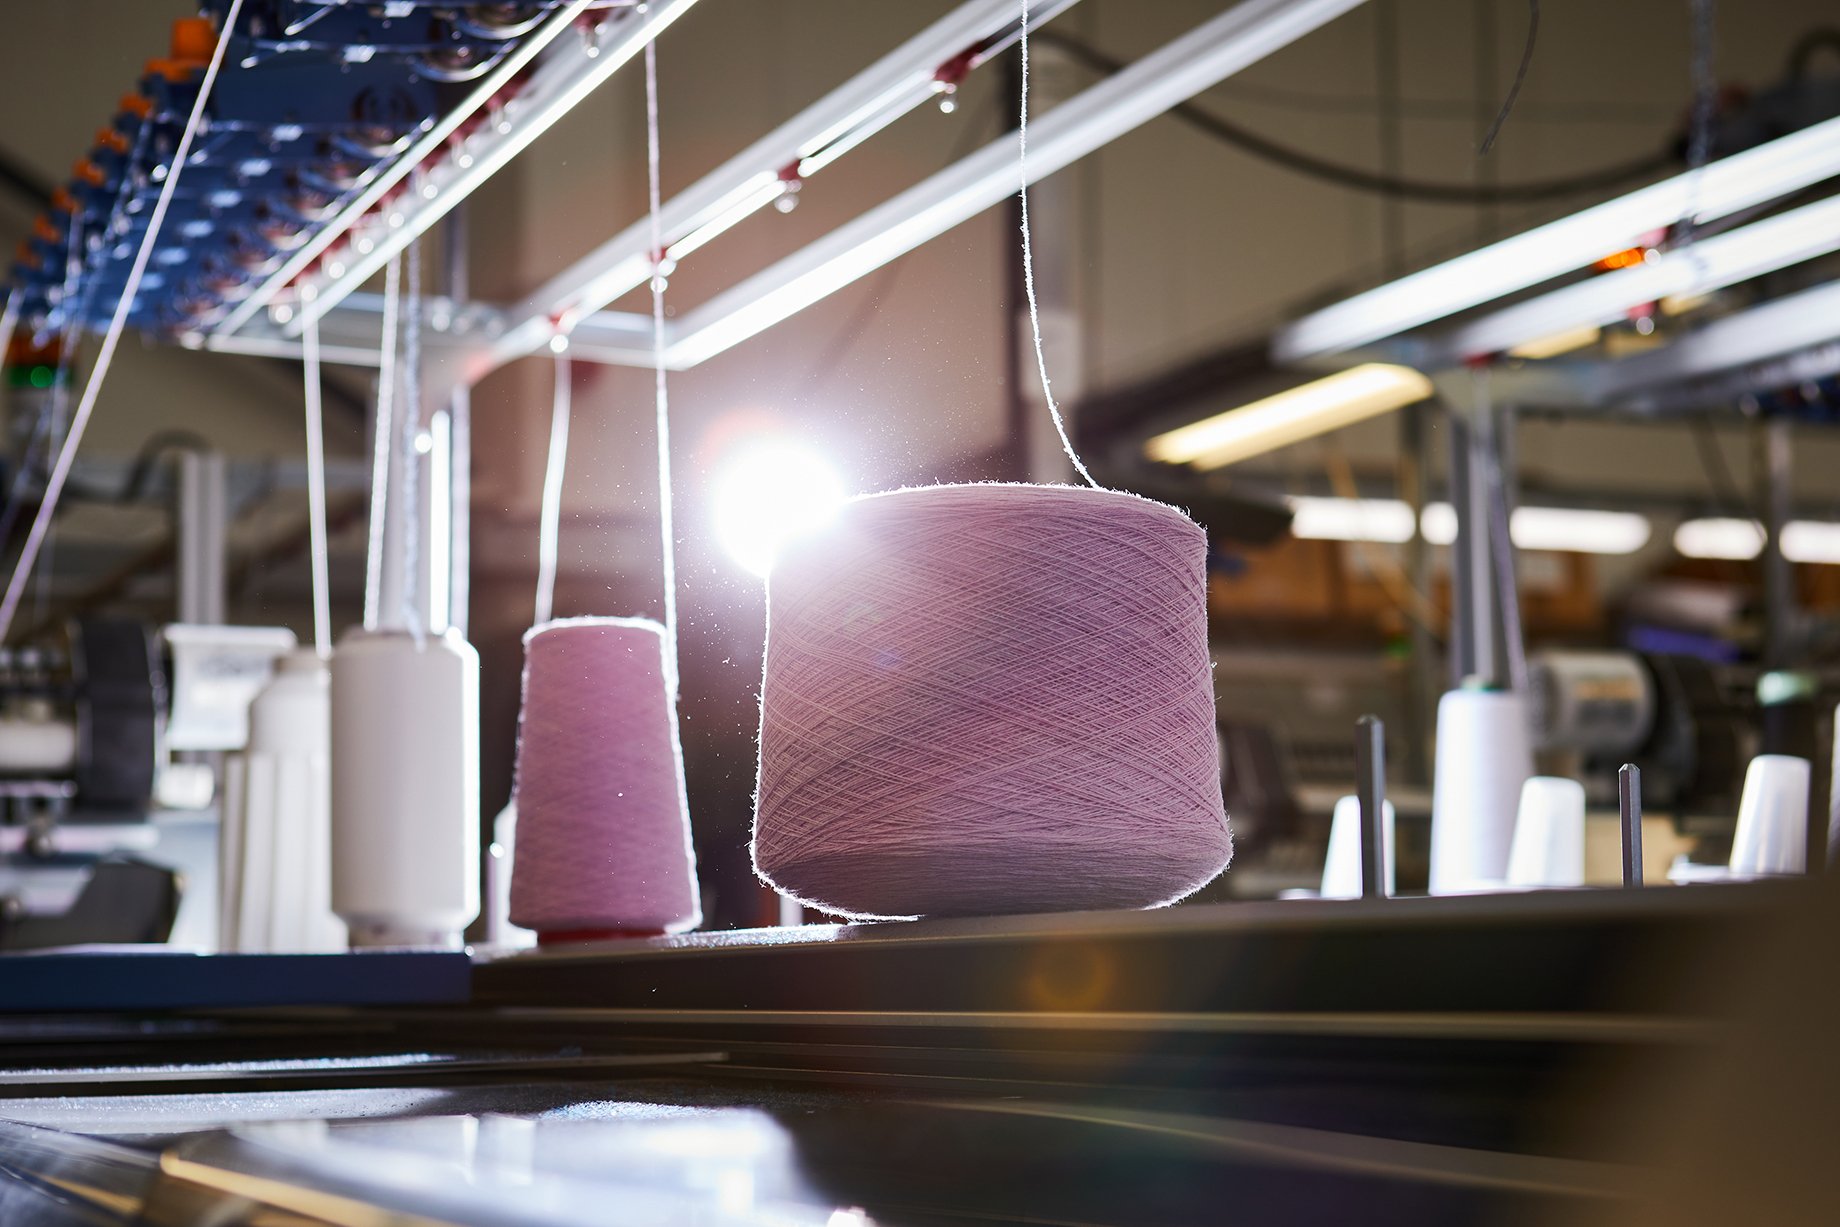 Fiber on spools at Albion Knitting Co. shot by Jackson Ray Petty for Peter Millar